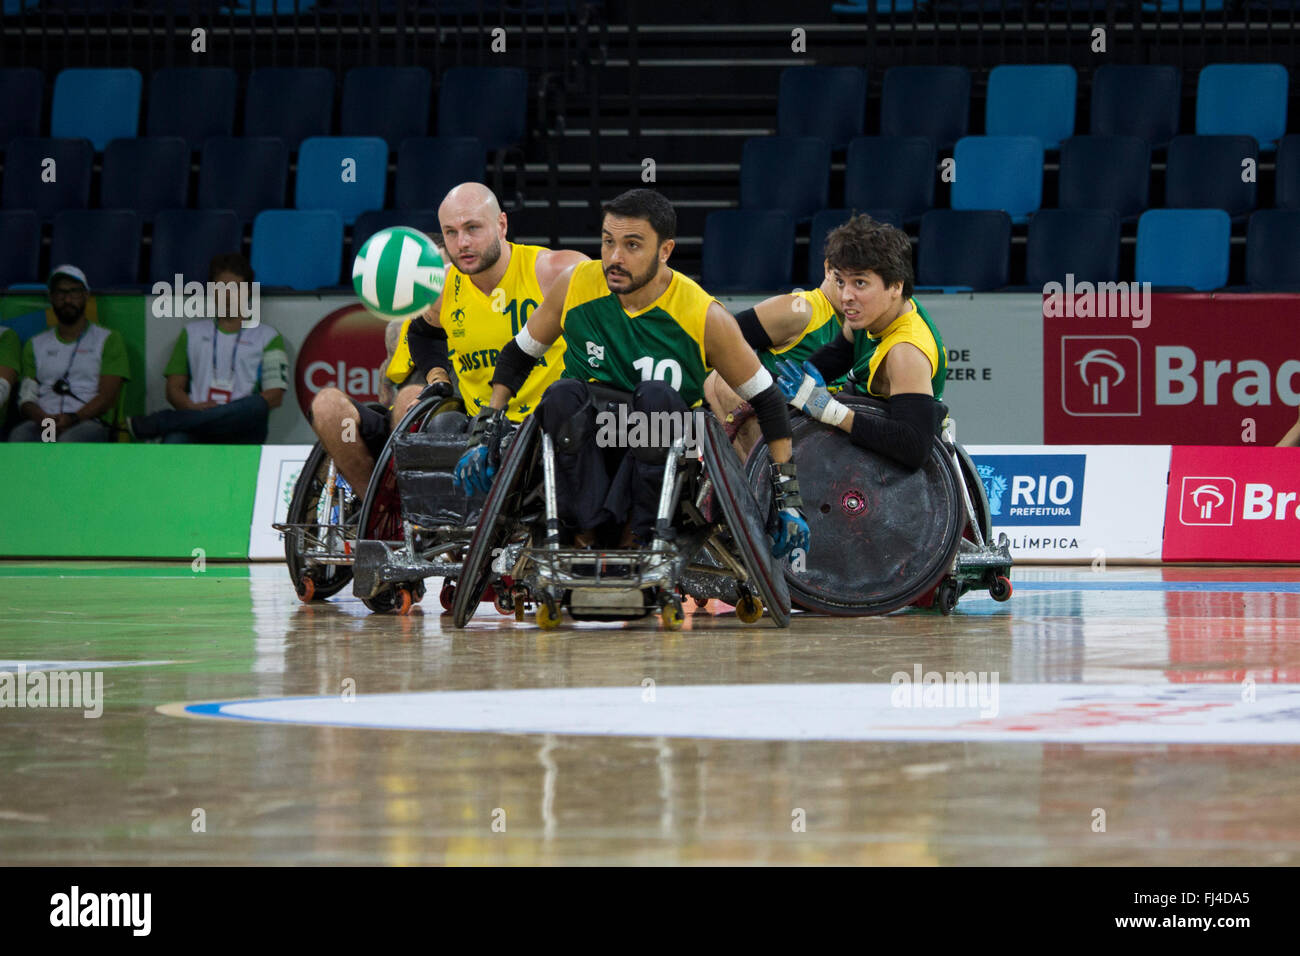 Rio de Janeiro, RJ, Brazil, 28 February 2016: Test event for the Paralympic Games Rio 2016 in Rio de Janeiro received this weekend (26-28 Feb) the International Wheelchair Rugby Championship which brought together the selections: Canada (1 ranking), Australia (current Olympic champion), Great Britain (European champions) and Brazil. Images of the match between Brazil and Australia which had the participation of Chris Bond and Ryley Batt (Australia) and Alexandre Taniguchi, Bruno Damasceno (Brazil) Credit:  Luiz Souza/Alamy Live News Stock Photo